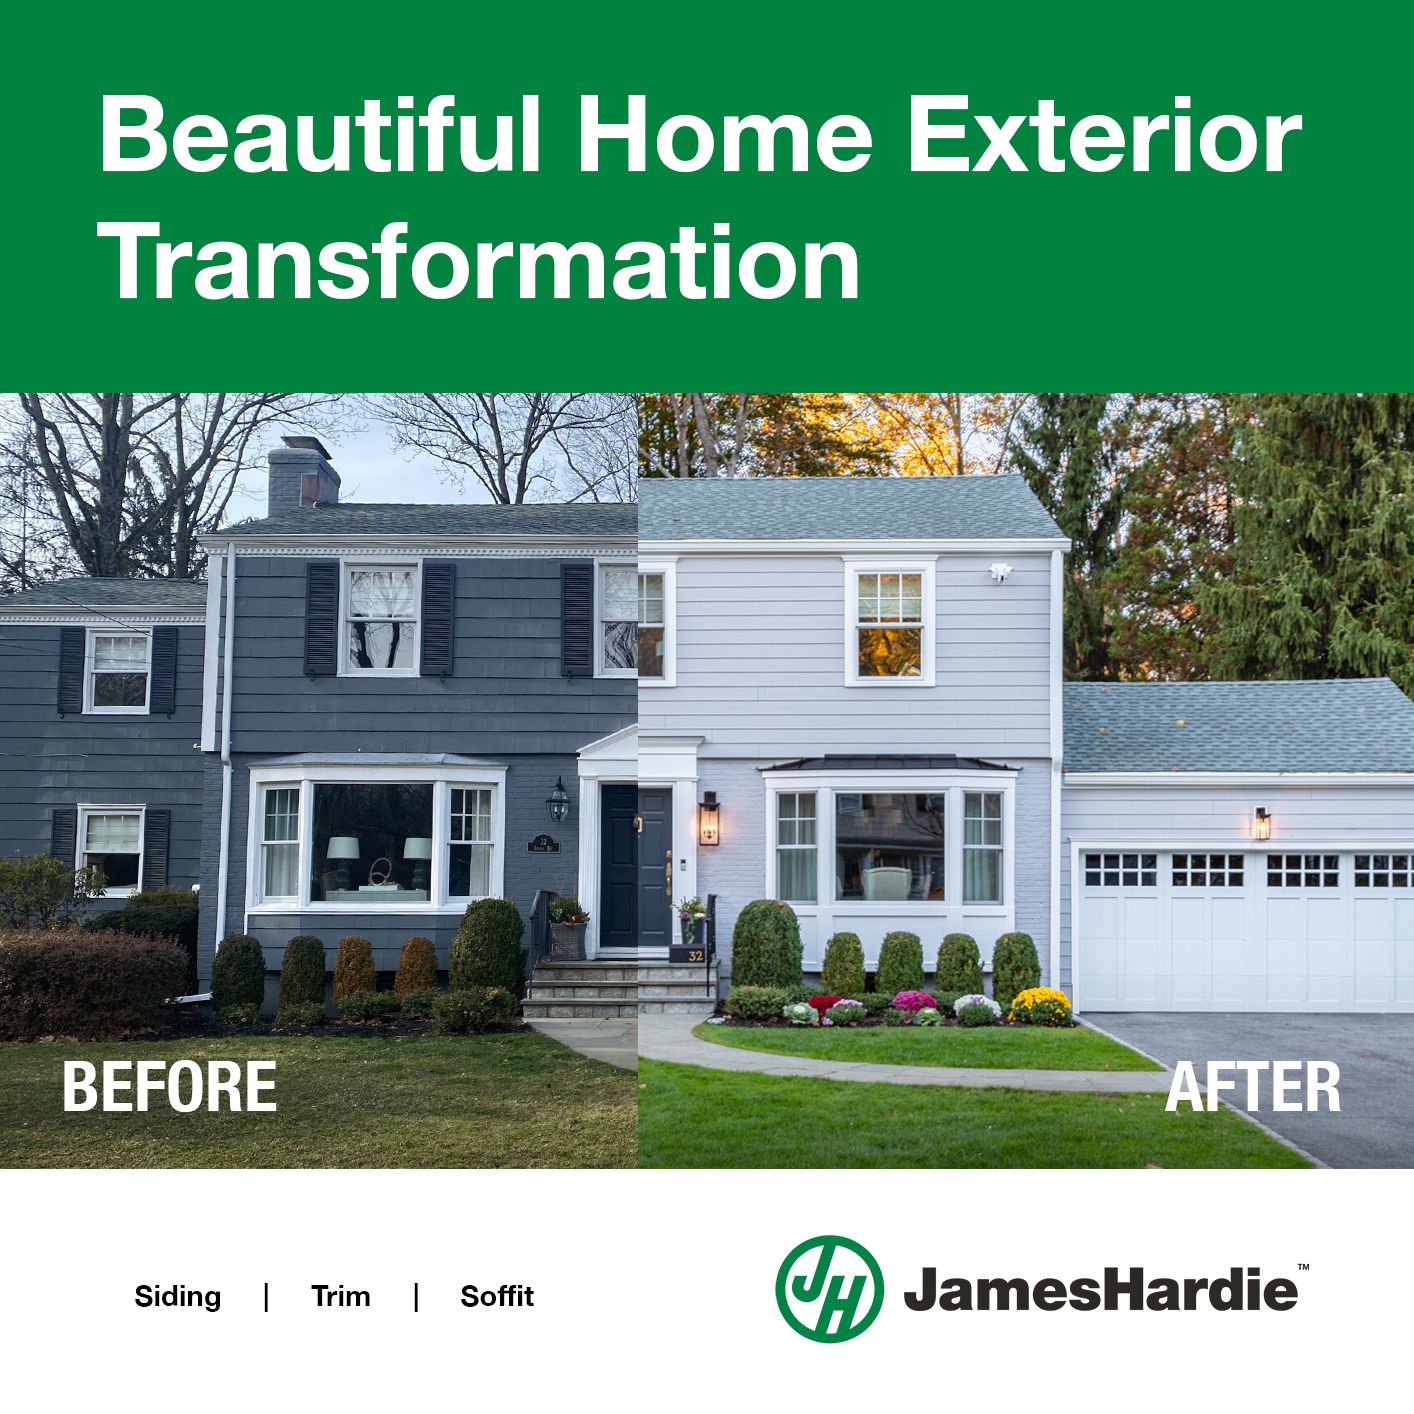 A before and after picture of a home exterior transformation